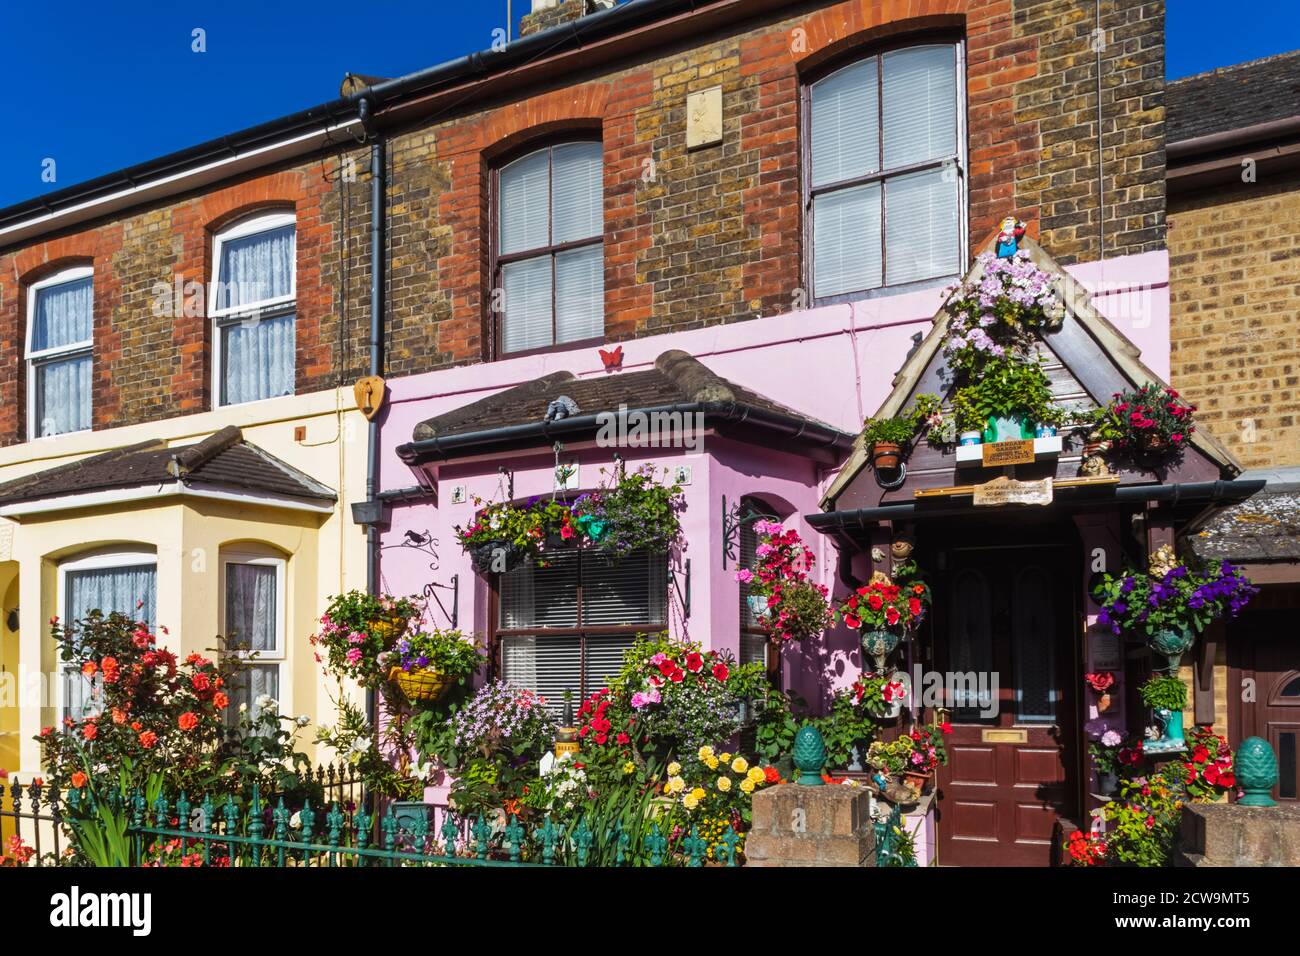 England, Kent, Deal, Residential Street, House with Colourful Front Garden Flowers Stock Photo